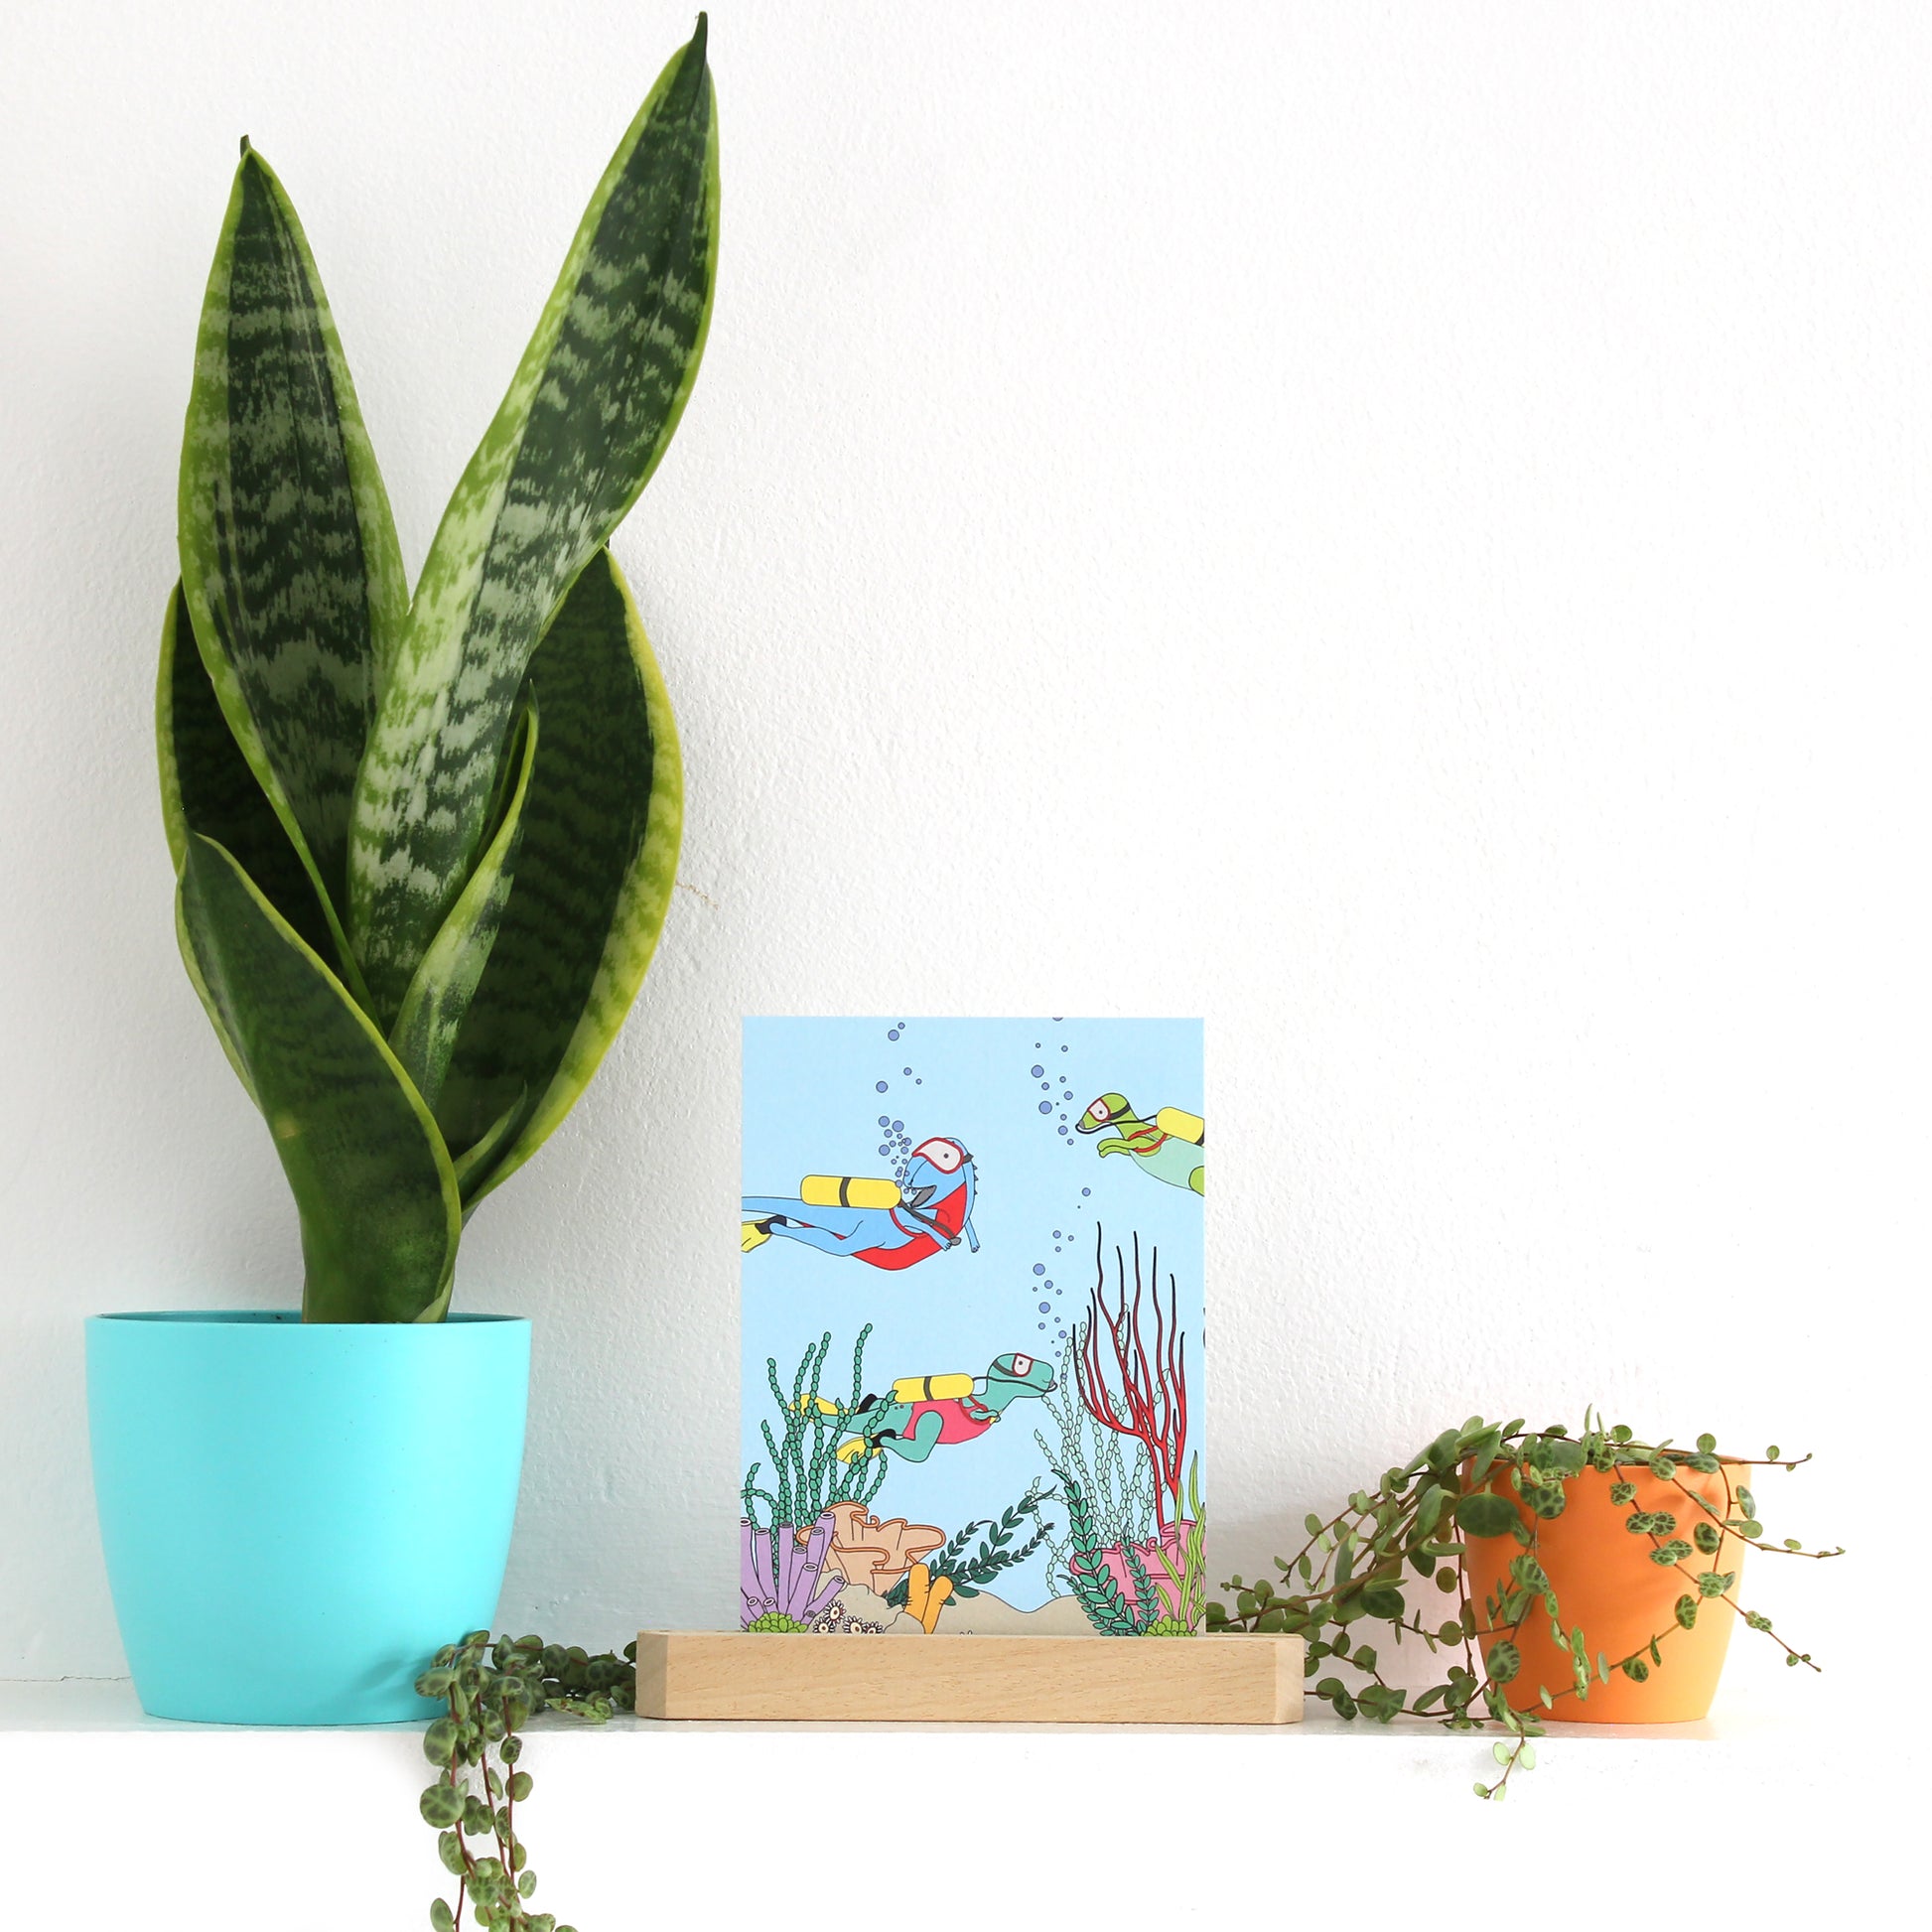 under the sea dinosaur postcard in a wooden stand with plants